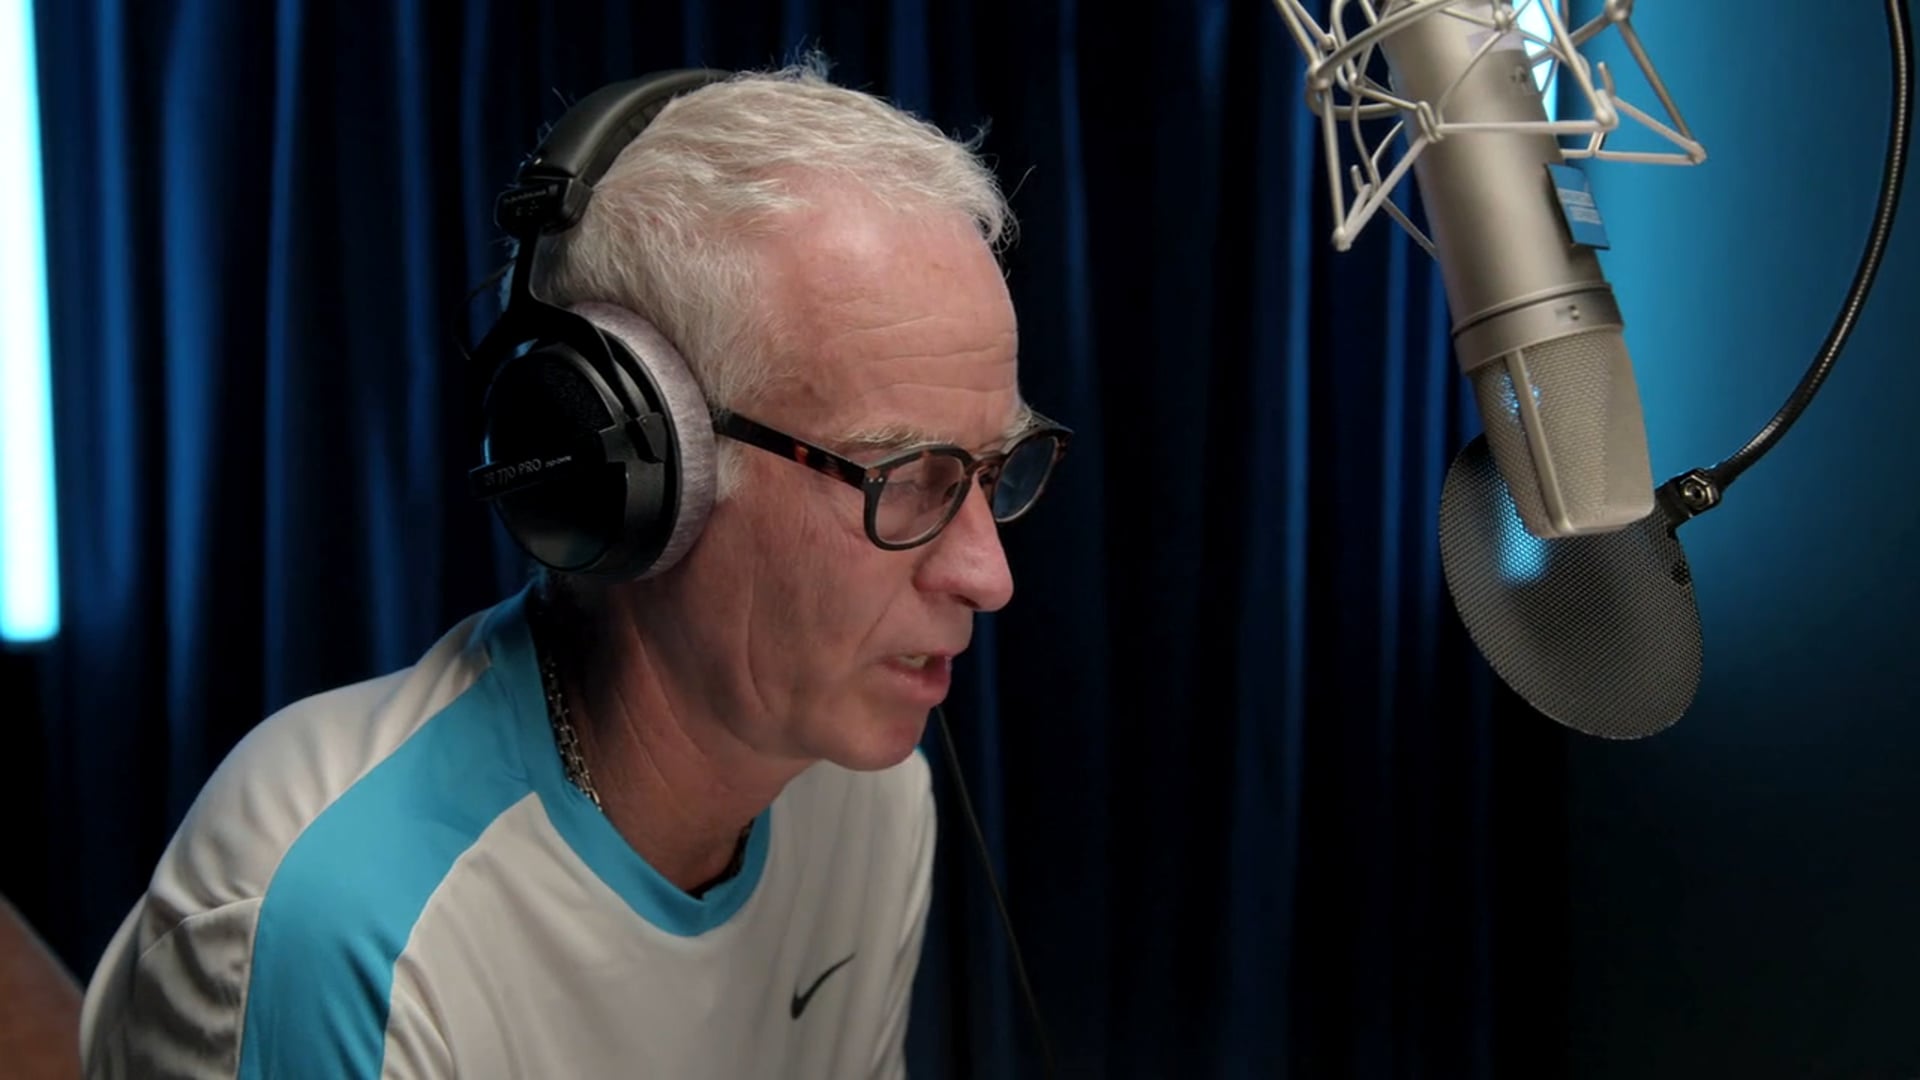 American Express | Calm App 'Rules of Tennis' with John McEnroe